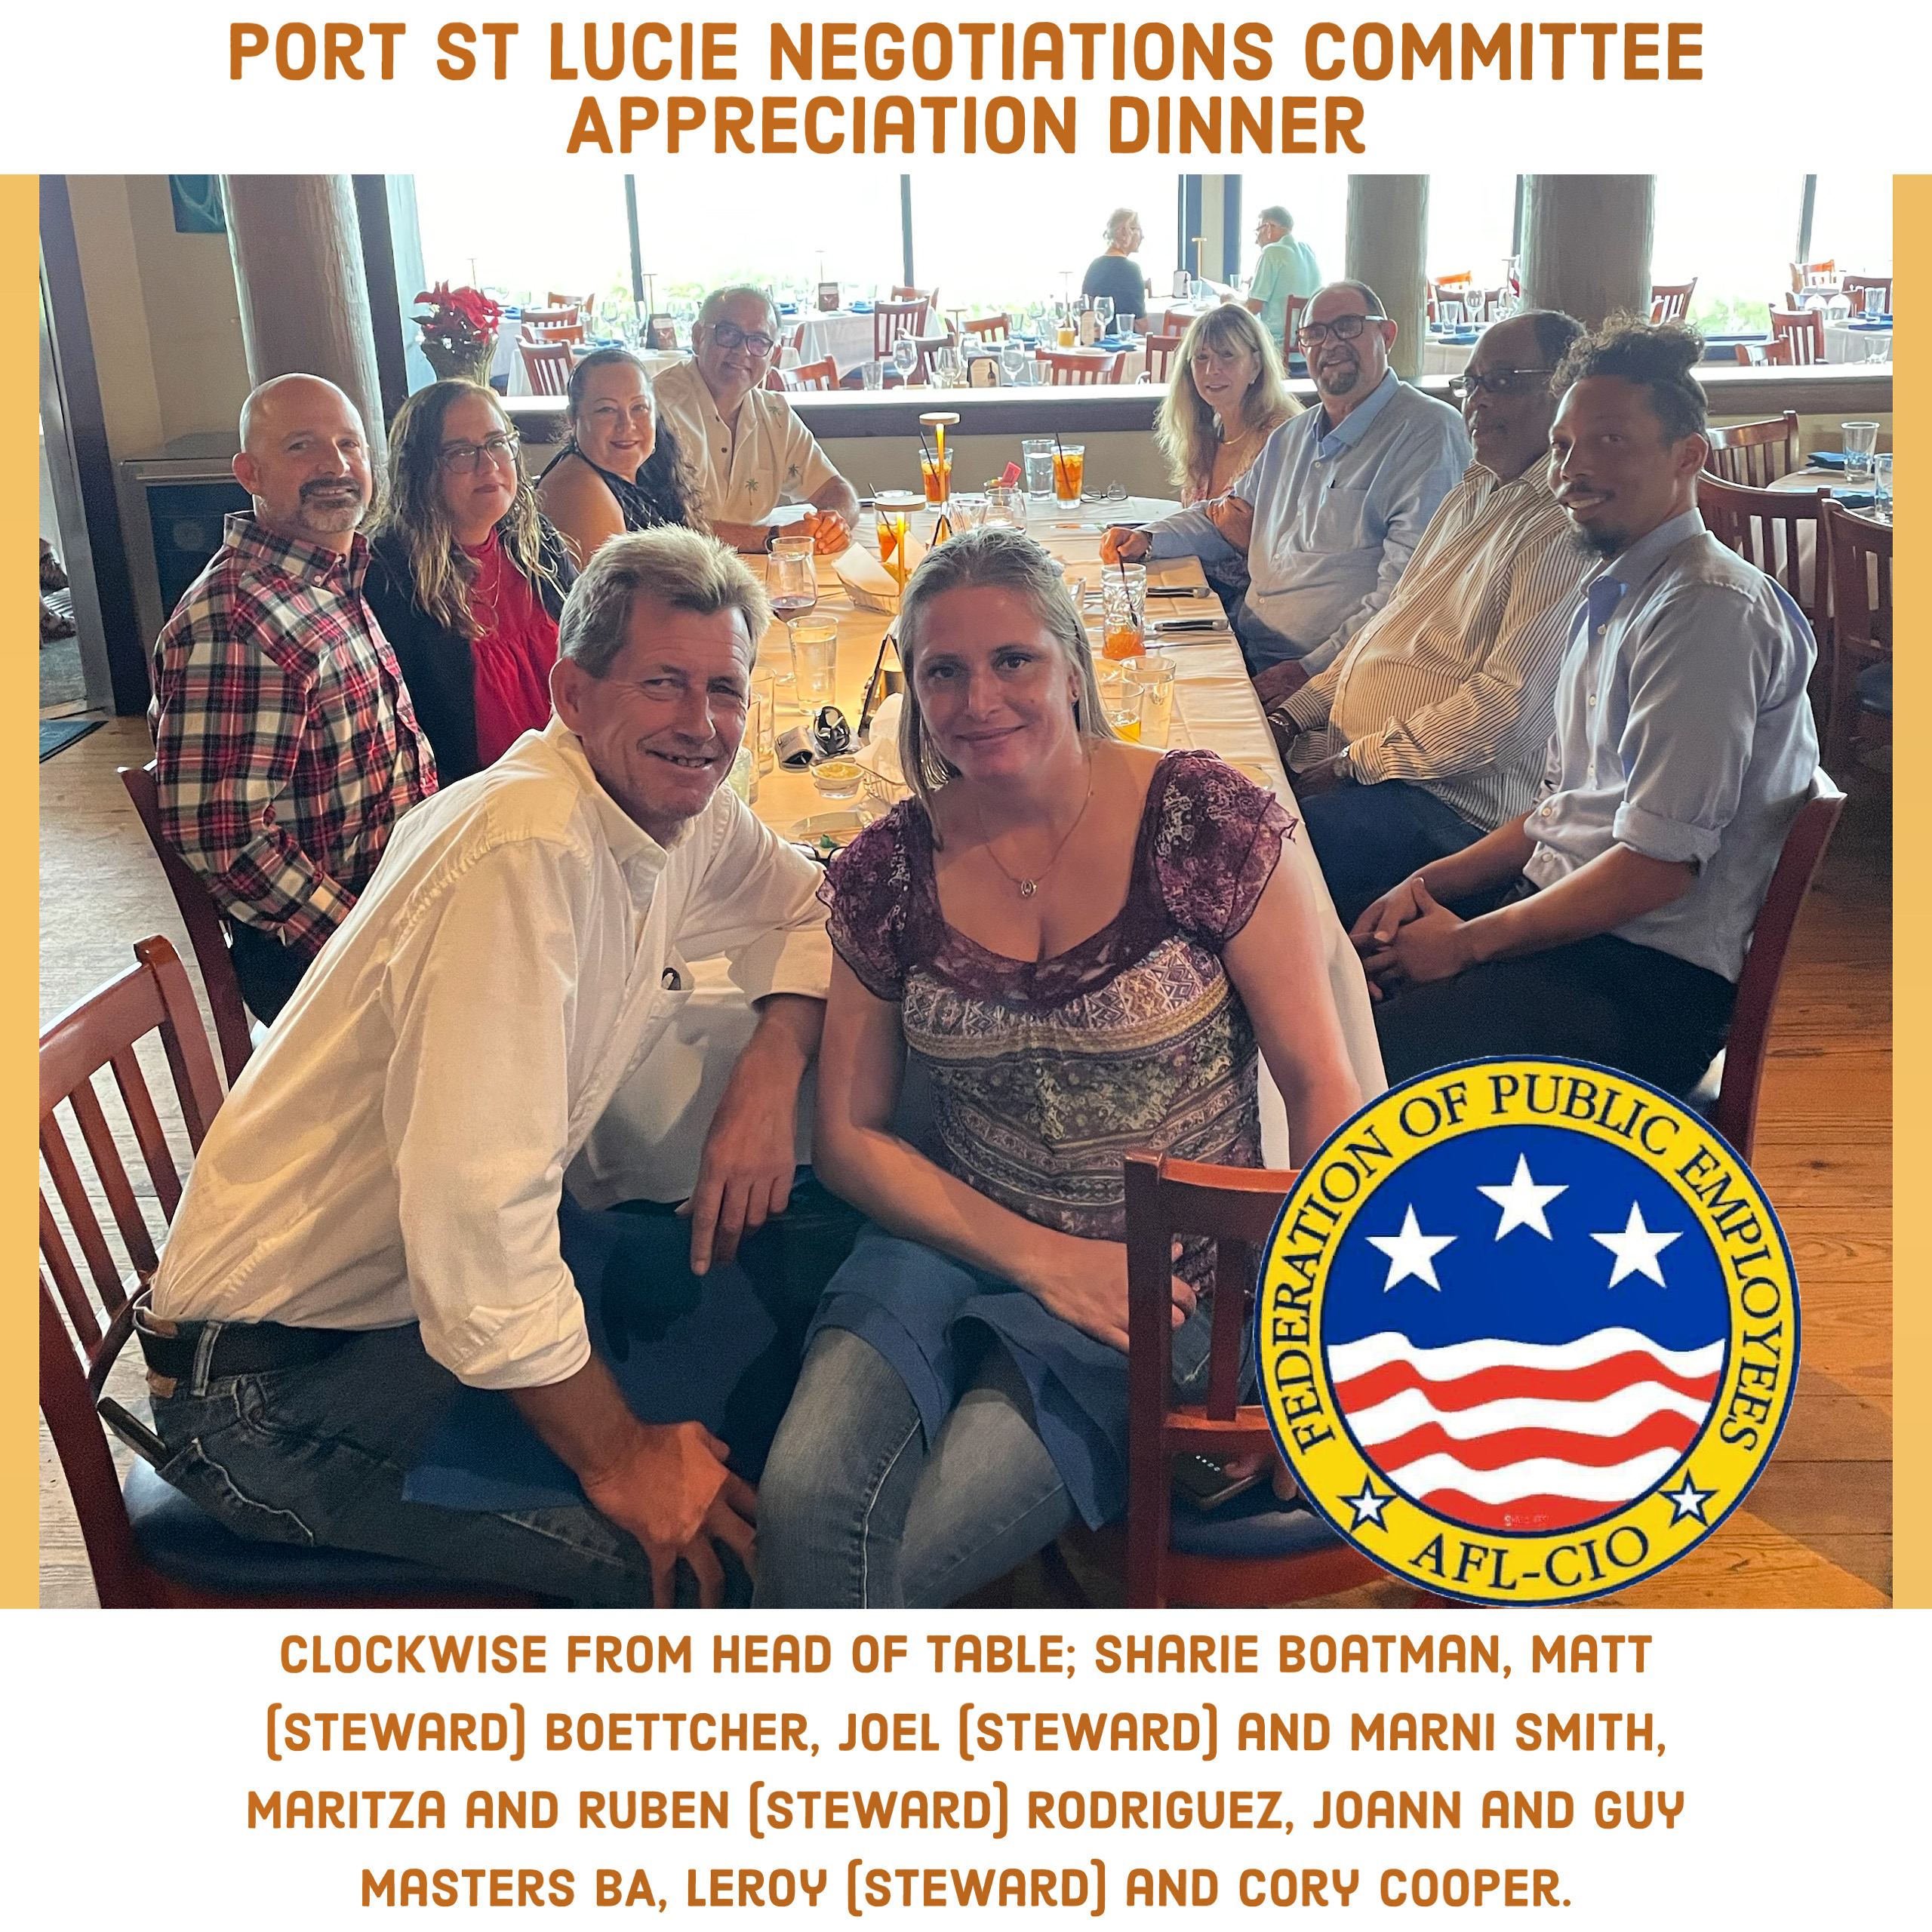 Port St. Lucie Negotiations Committee Appreciation Dinner